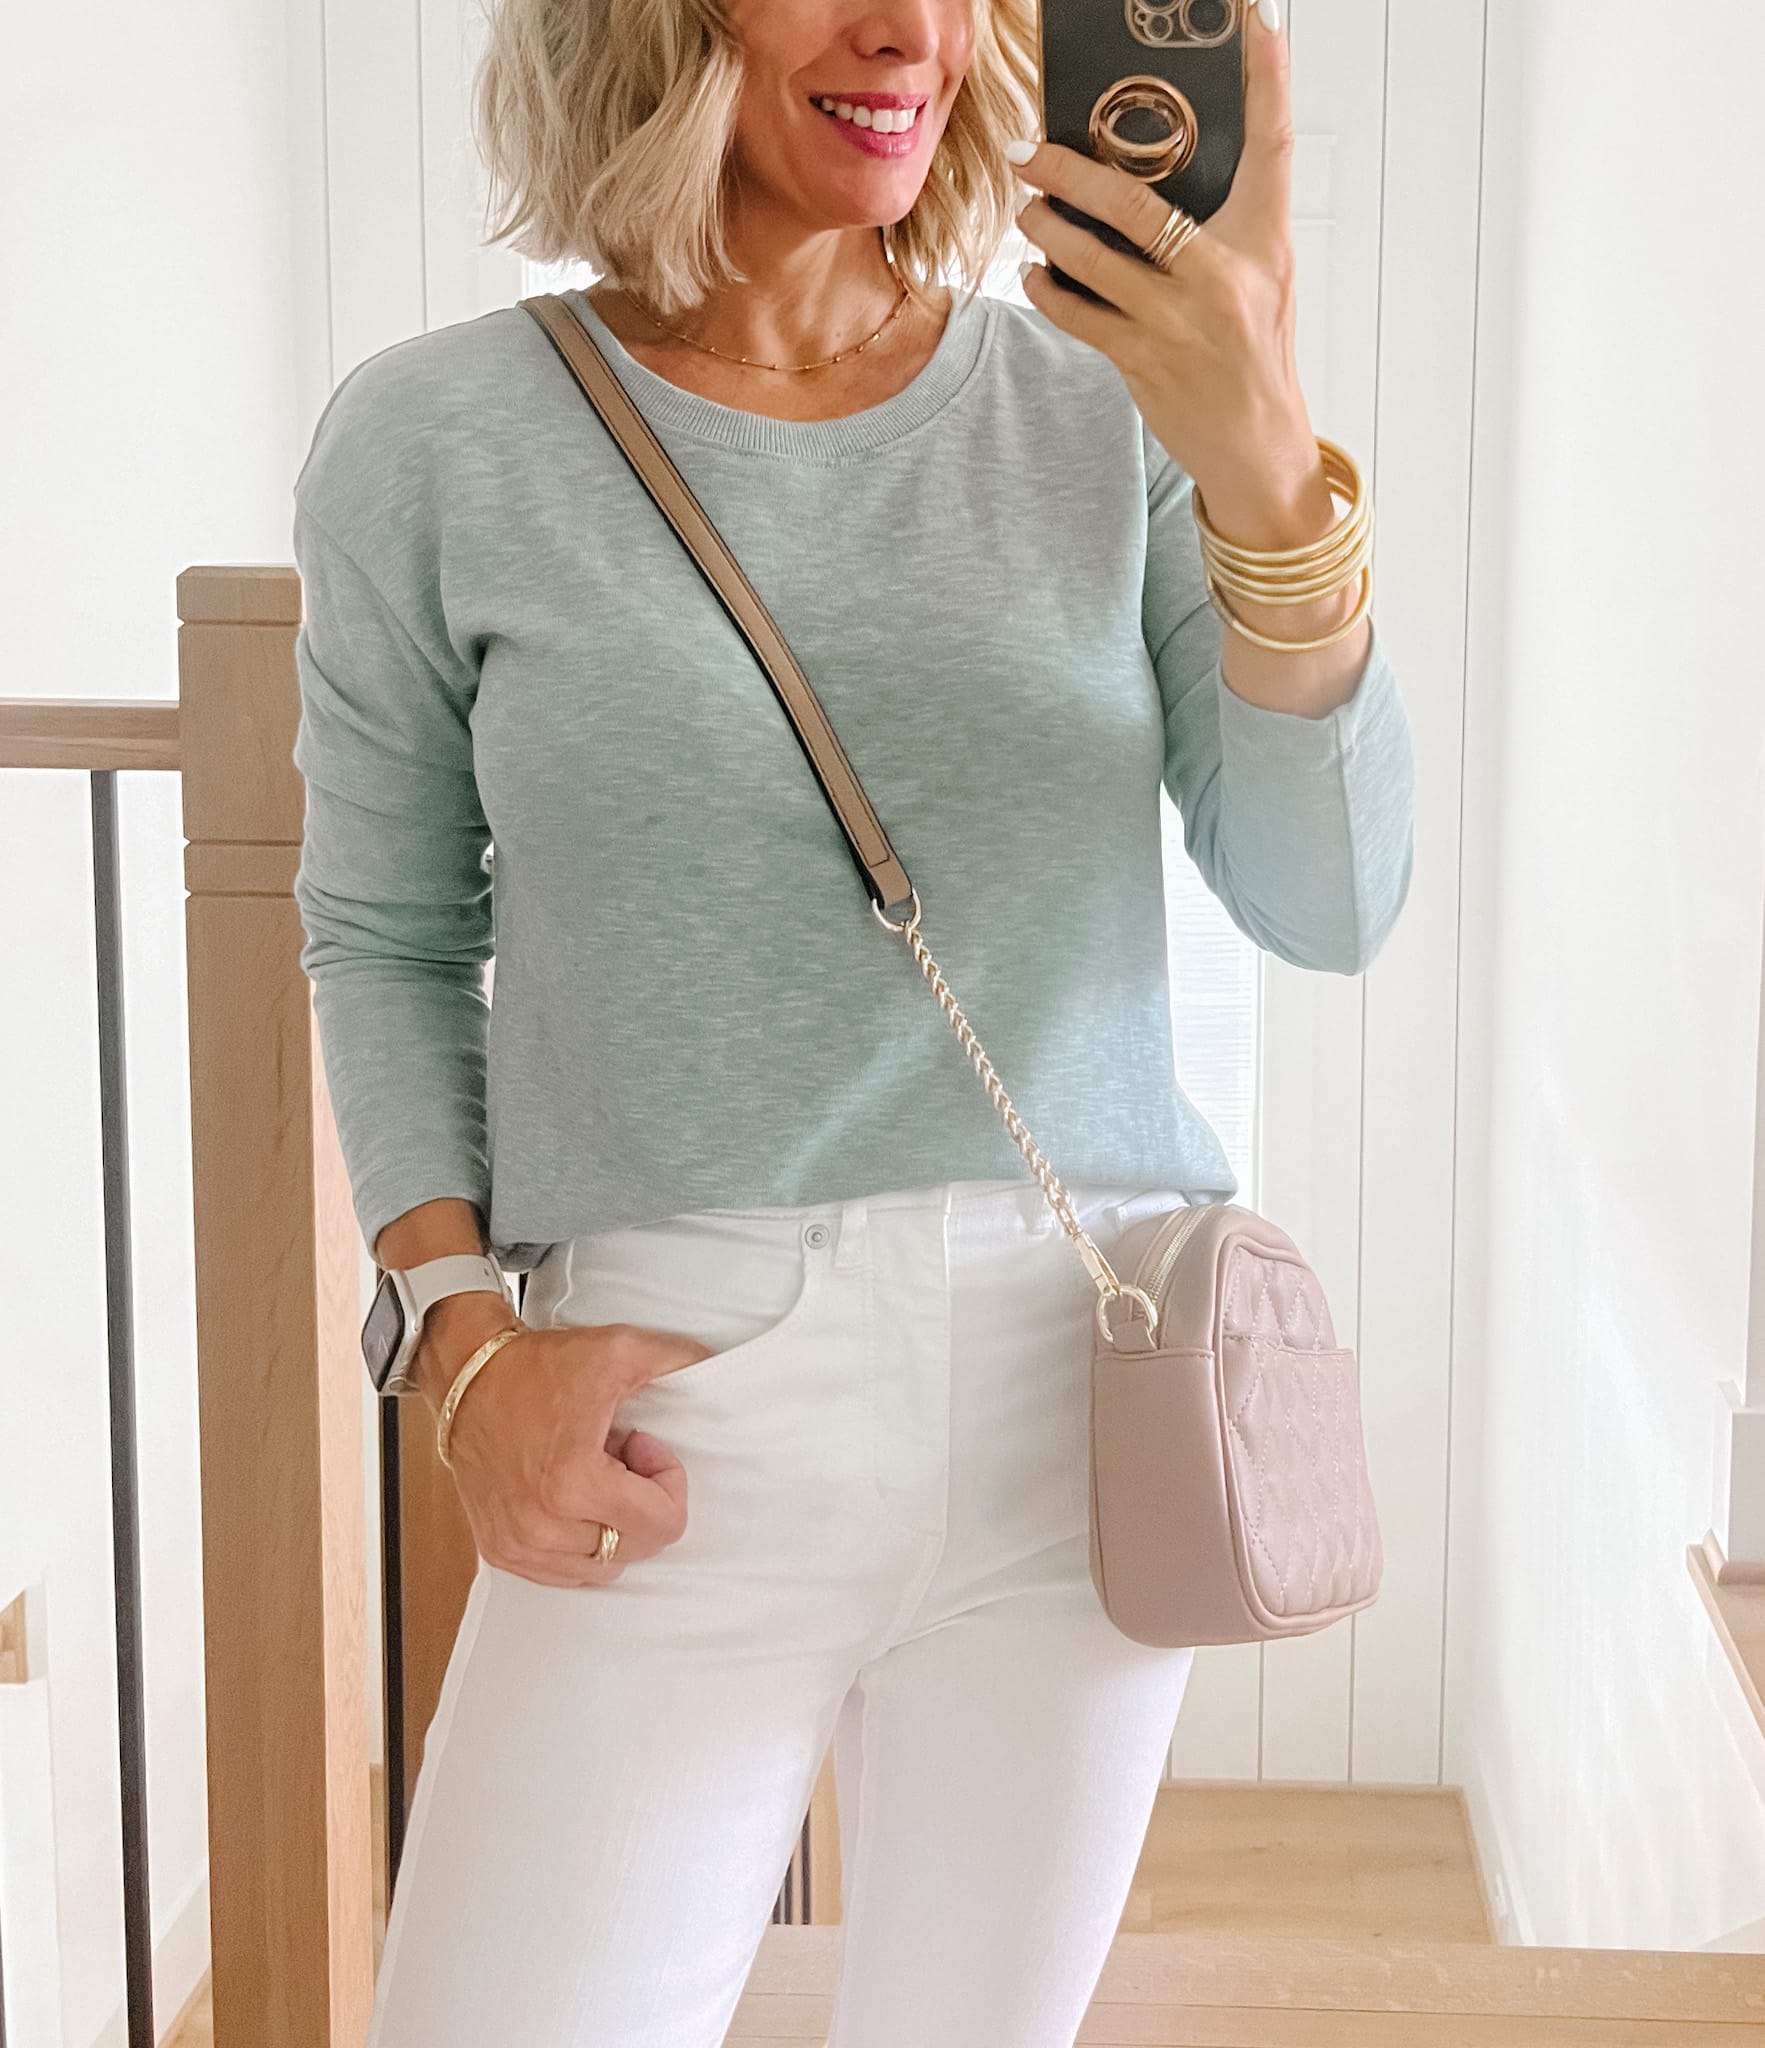 Long Sleeve top, Jeans, Sandals 